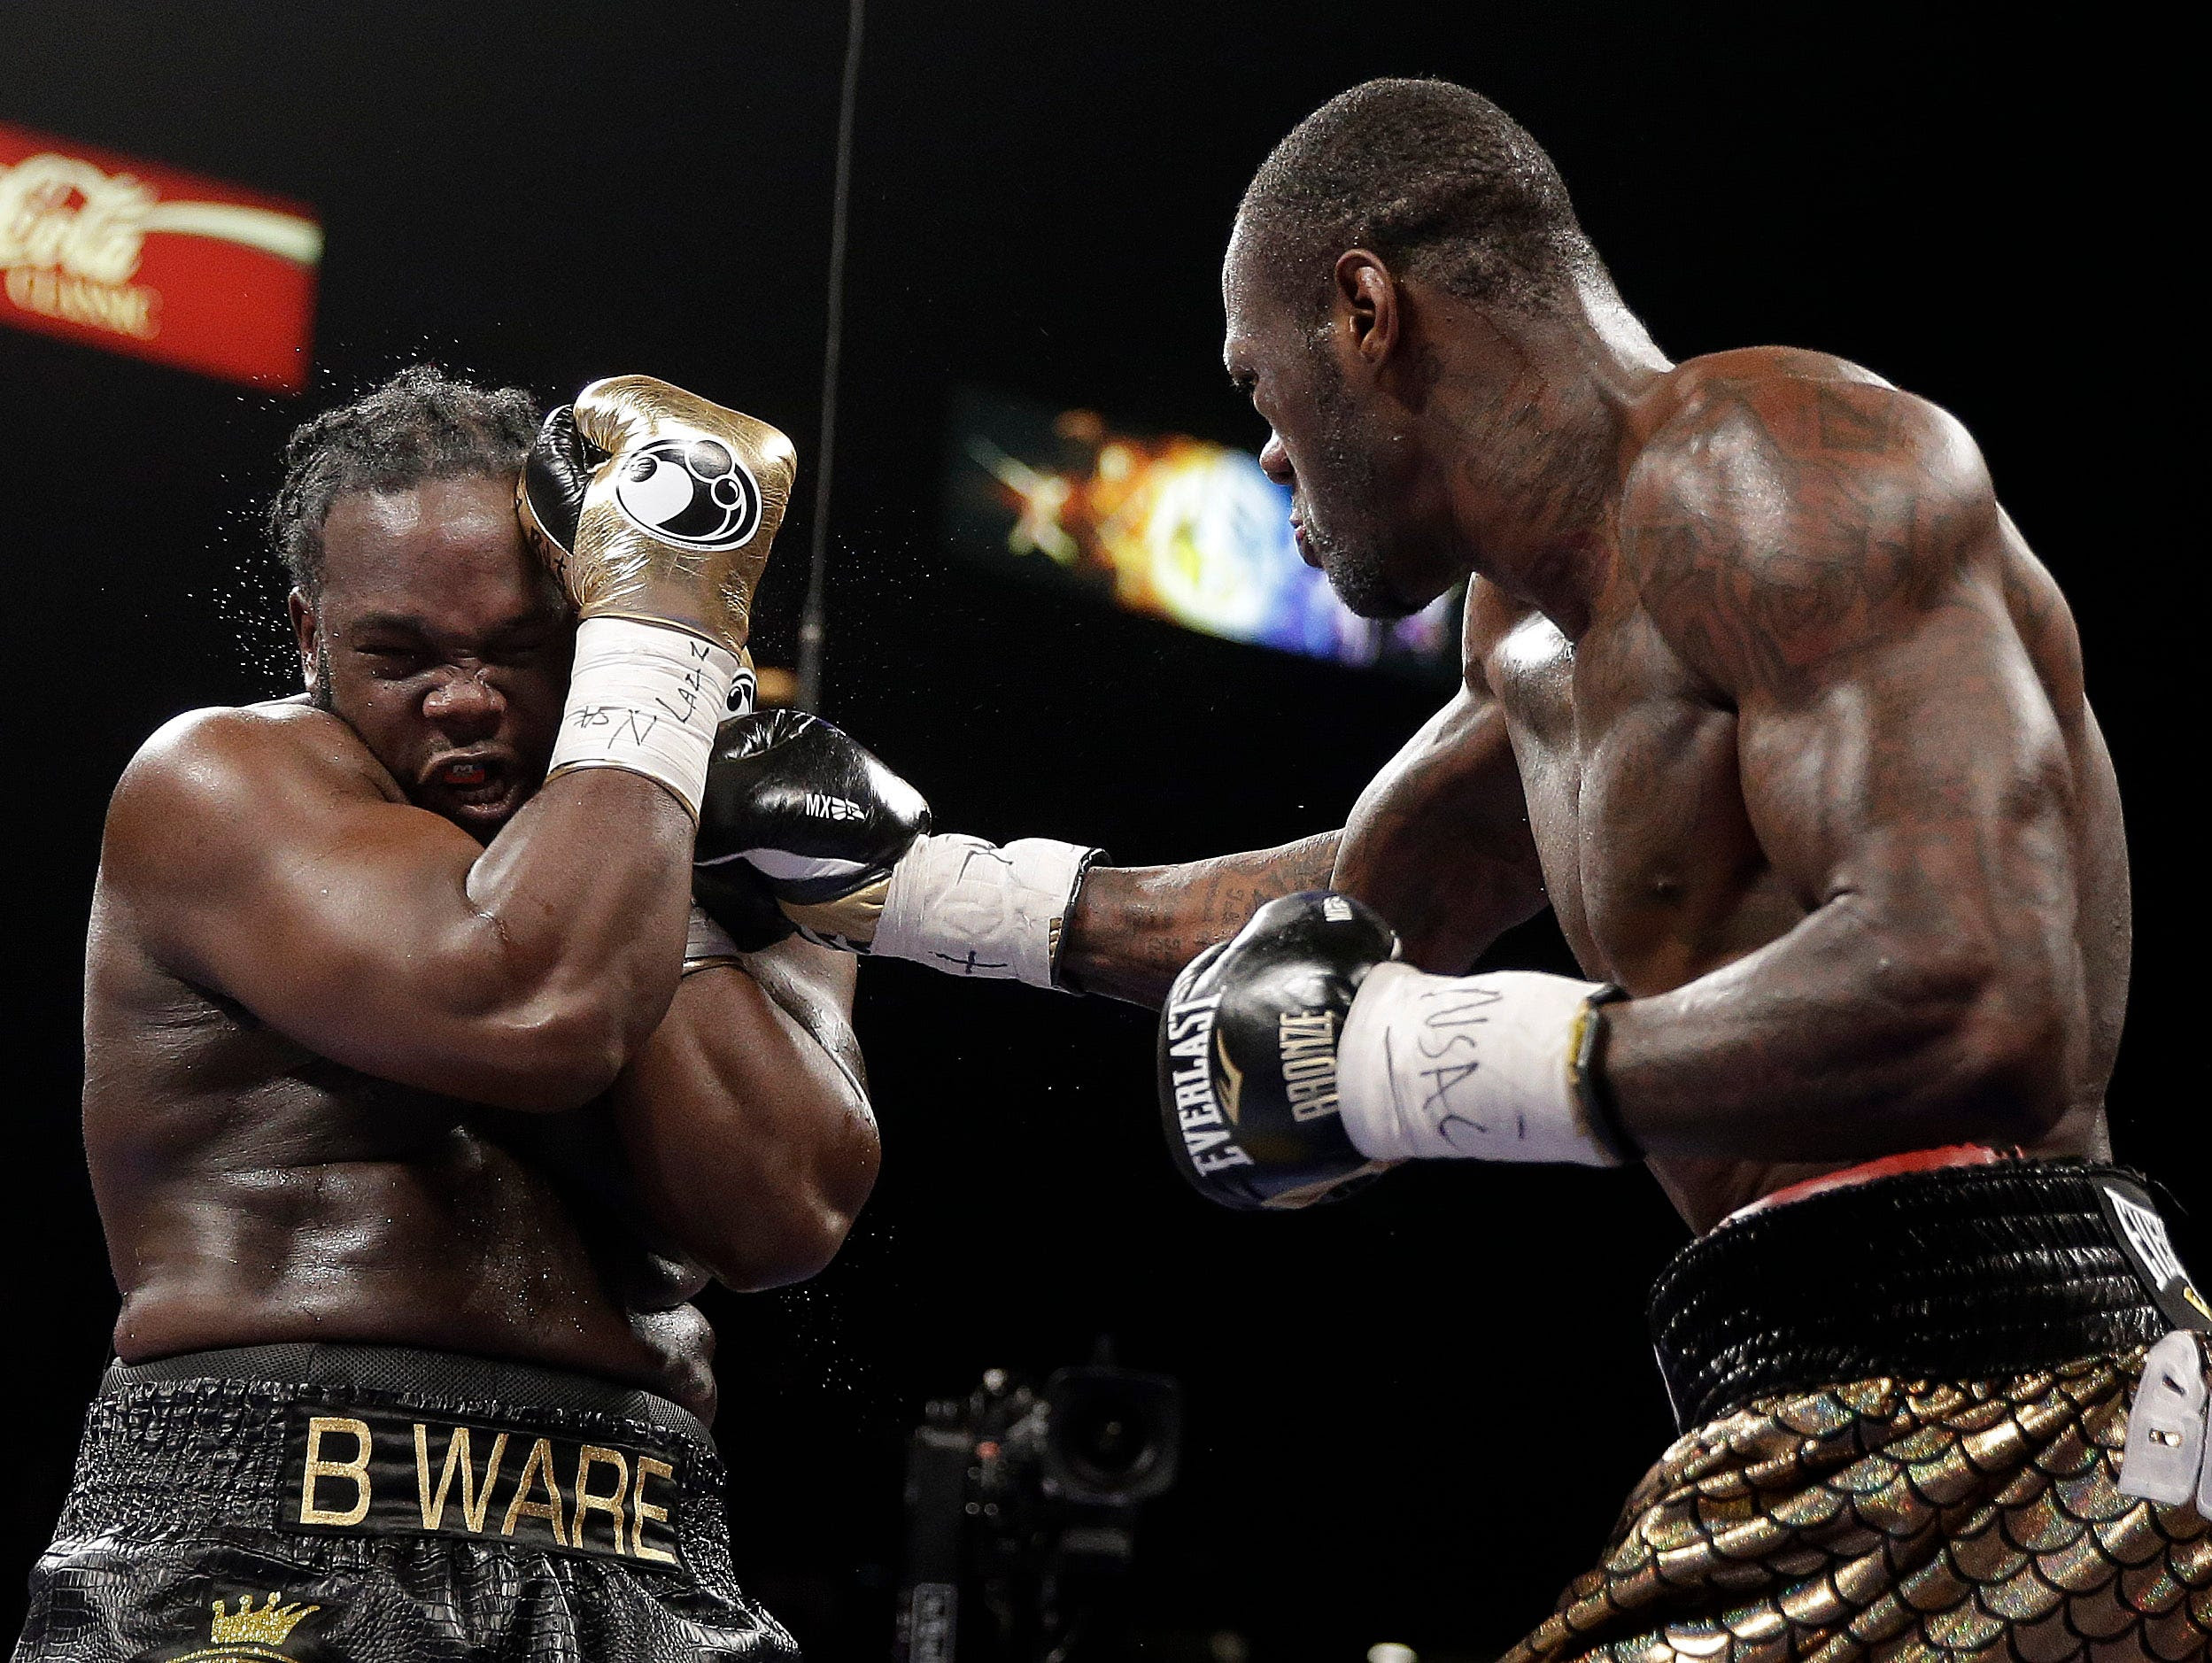 Deontay Wilder, right, punches Bermane Stiverne during their WBC heavyweight championship fight Saturday. Wilder becomes the first American heavyweight champ since 2006.